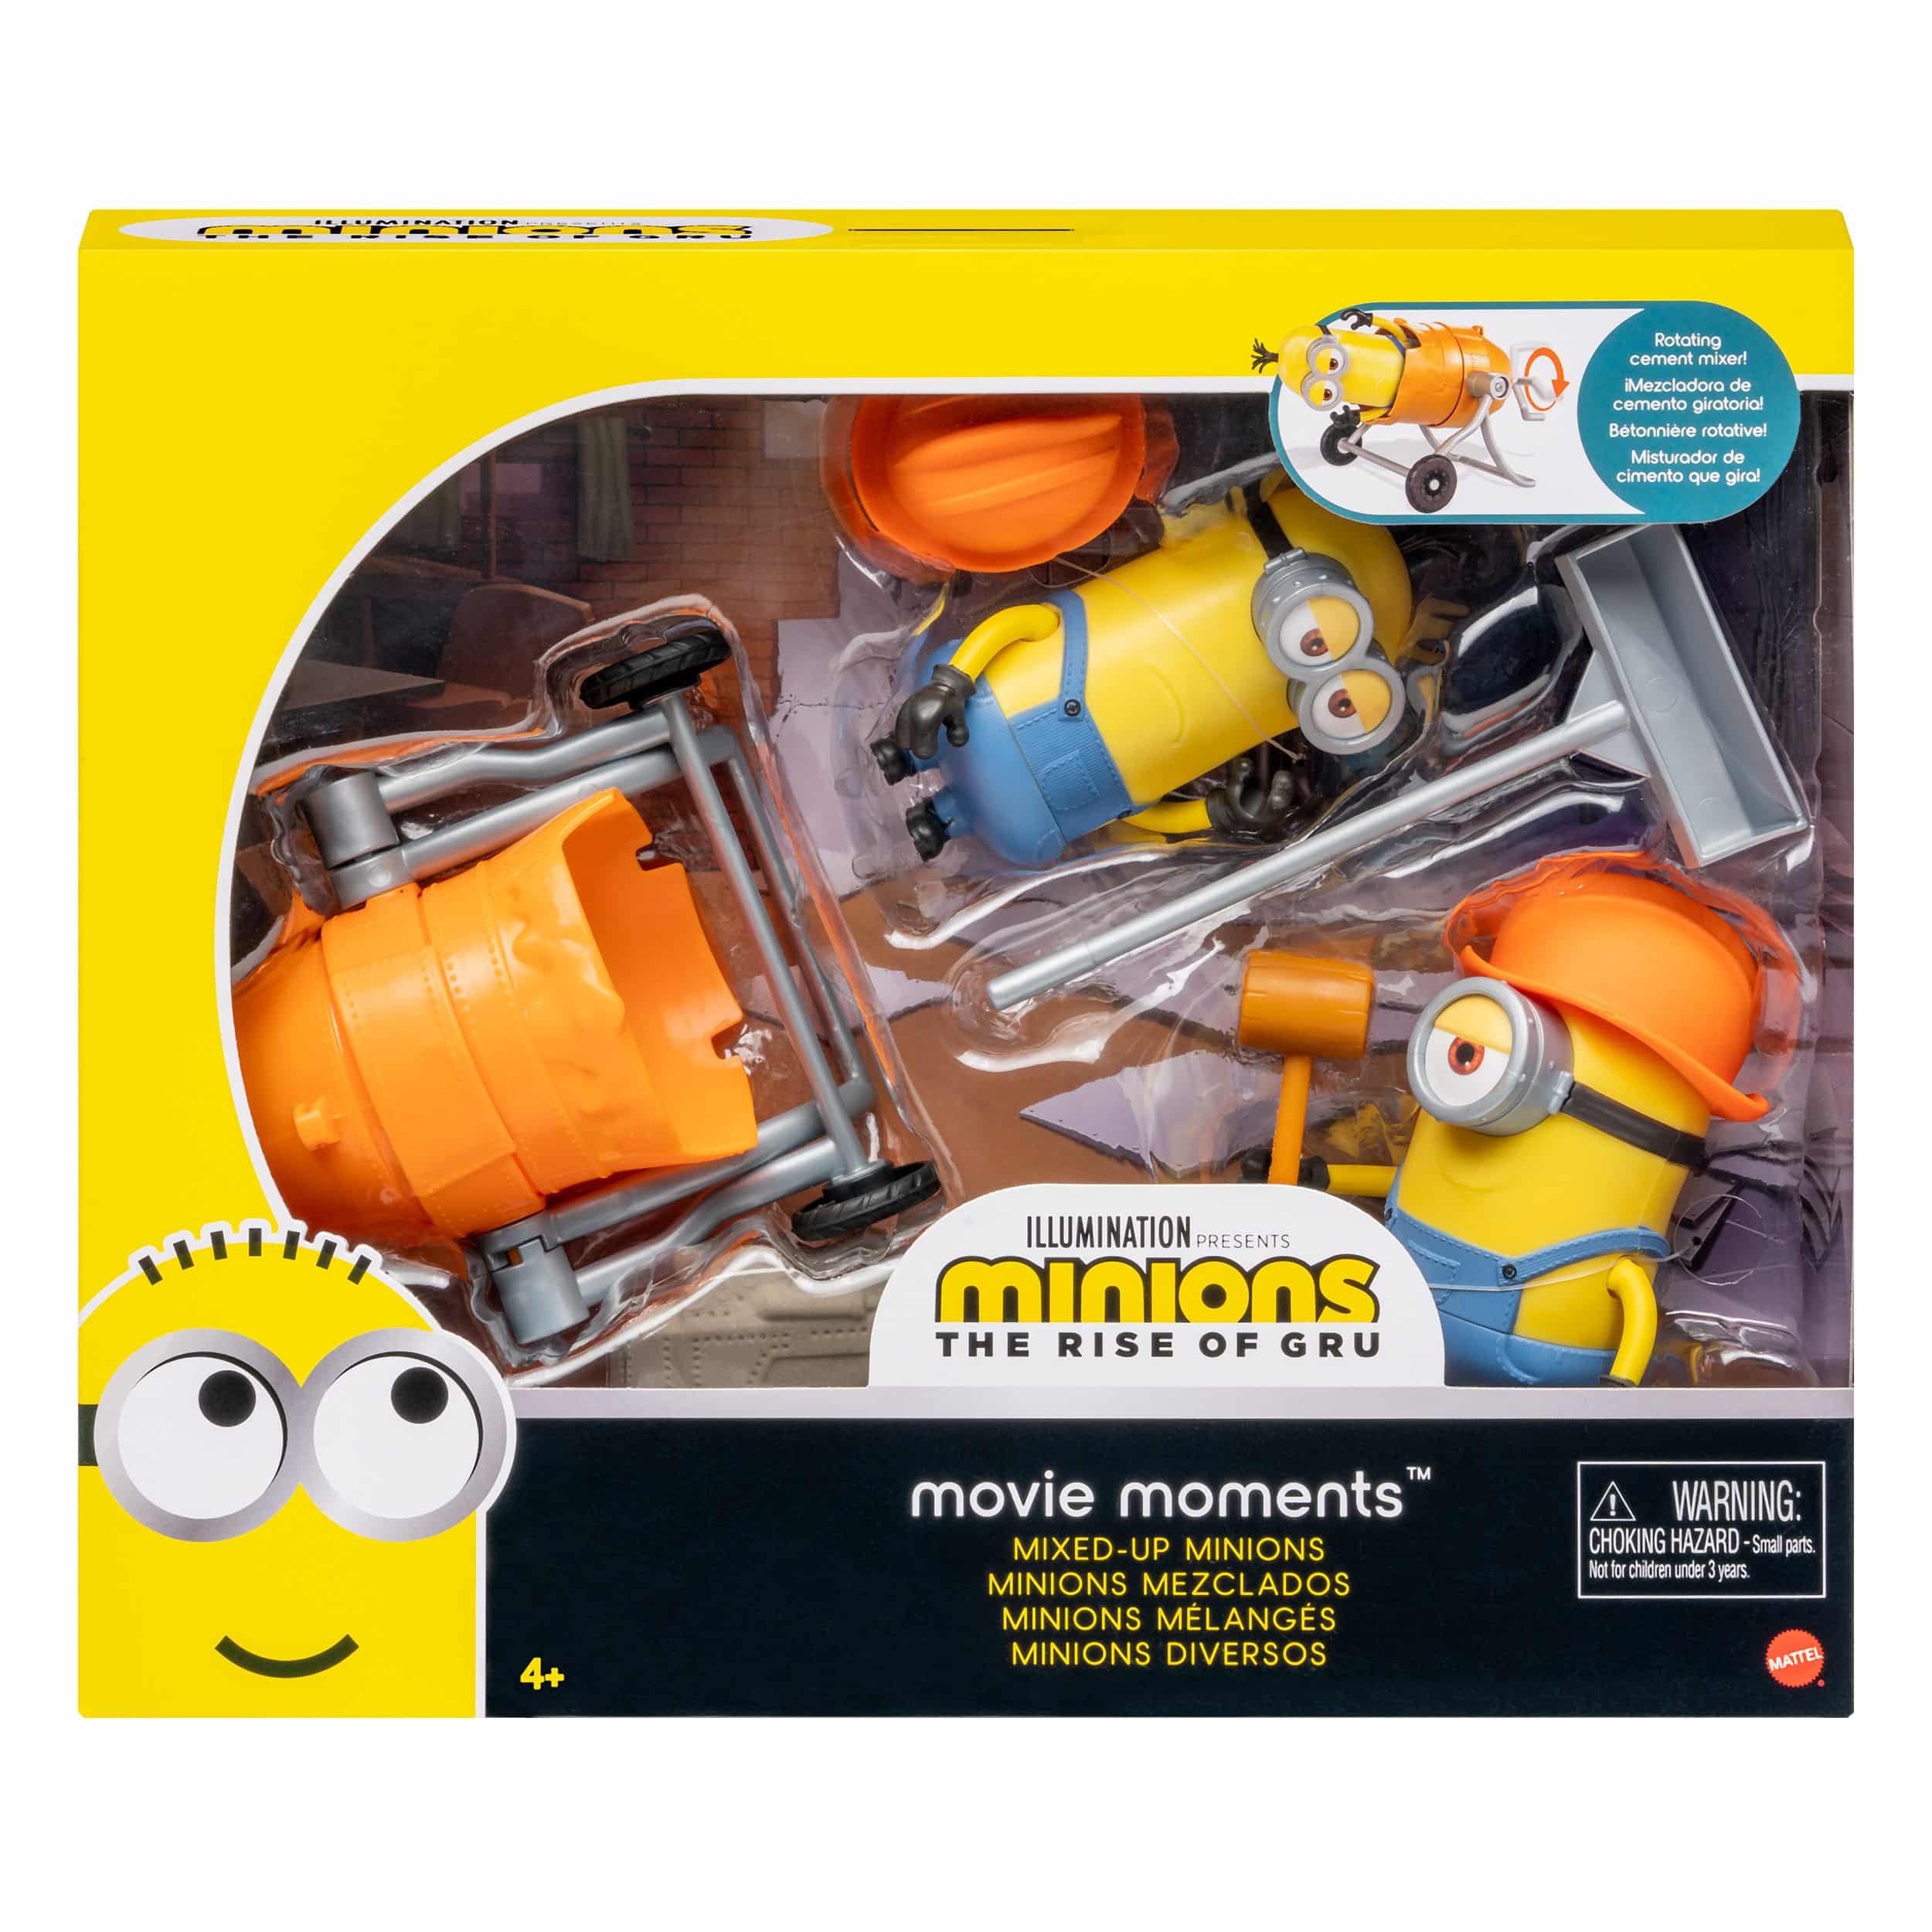 Minions The Rise of Gru - Movie Moments - Mixed-Up Minions Pack